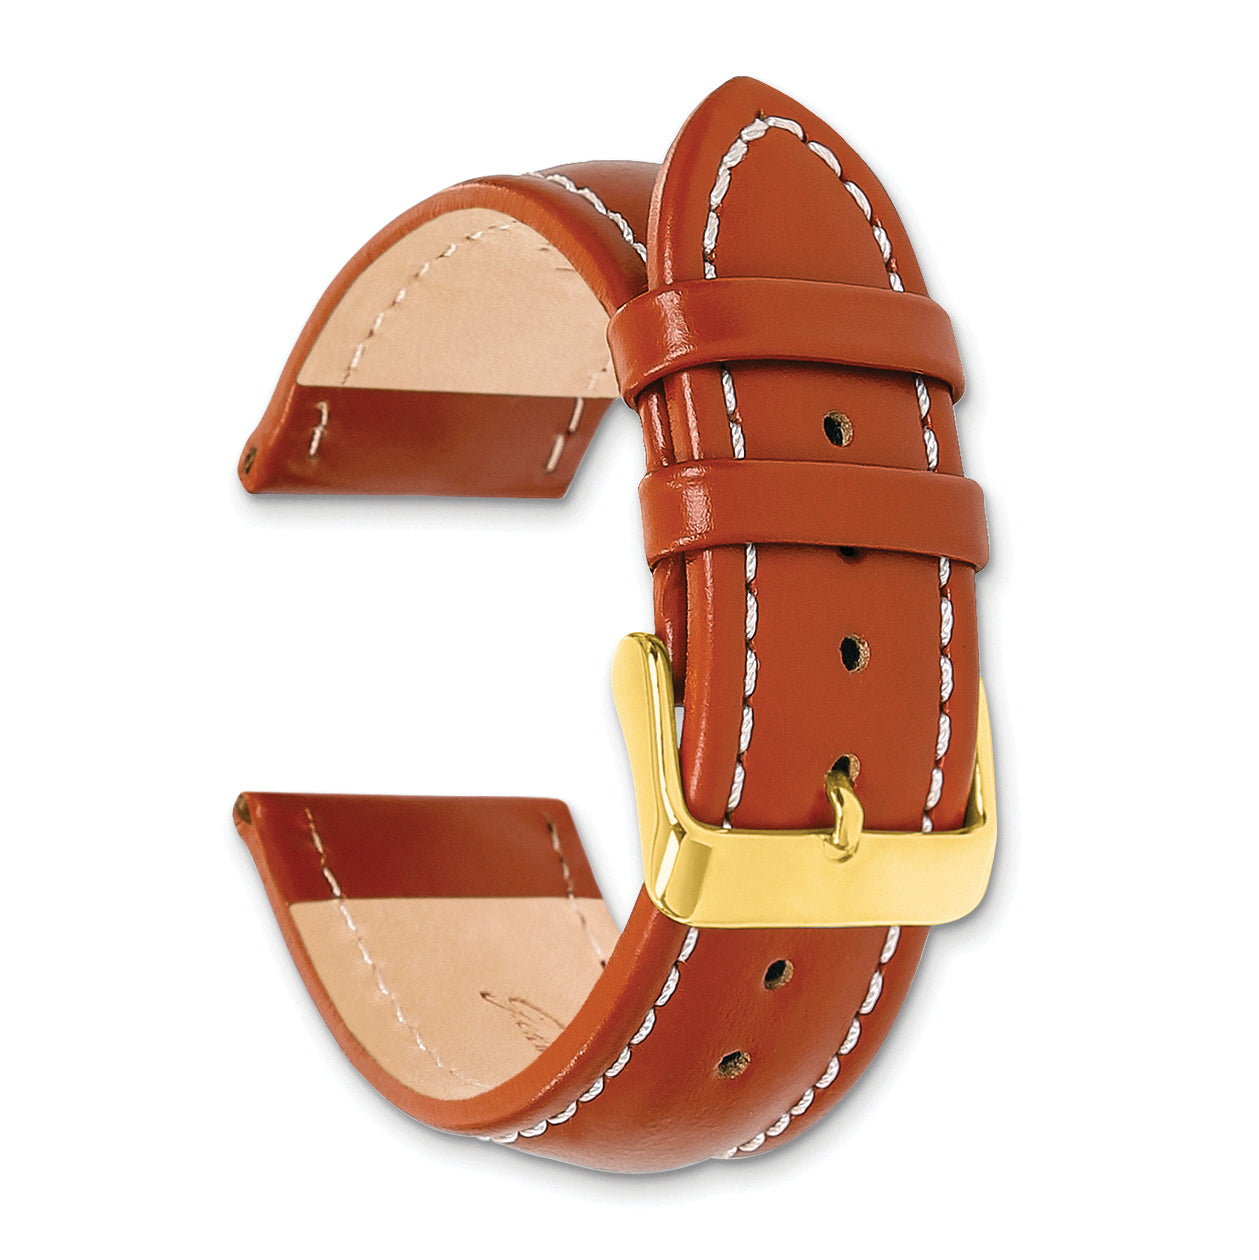 14mm Saddle Brown Oil-tanned Leather with White Stitching and Gold-tone Buckle 6.75 inch Watch Band